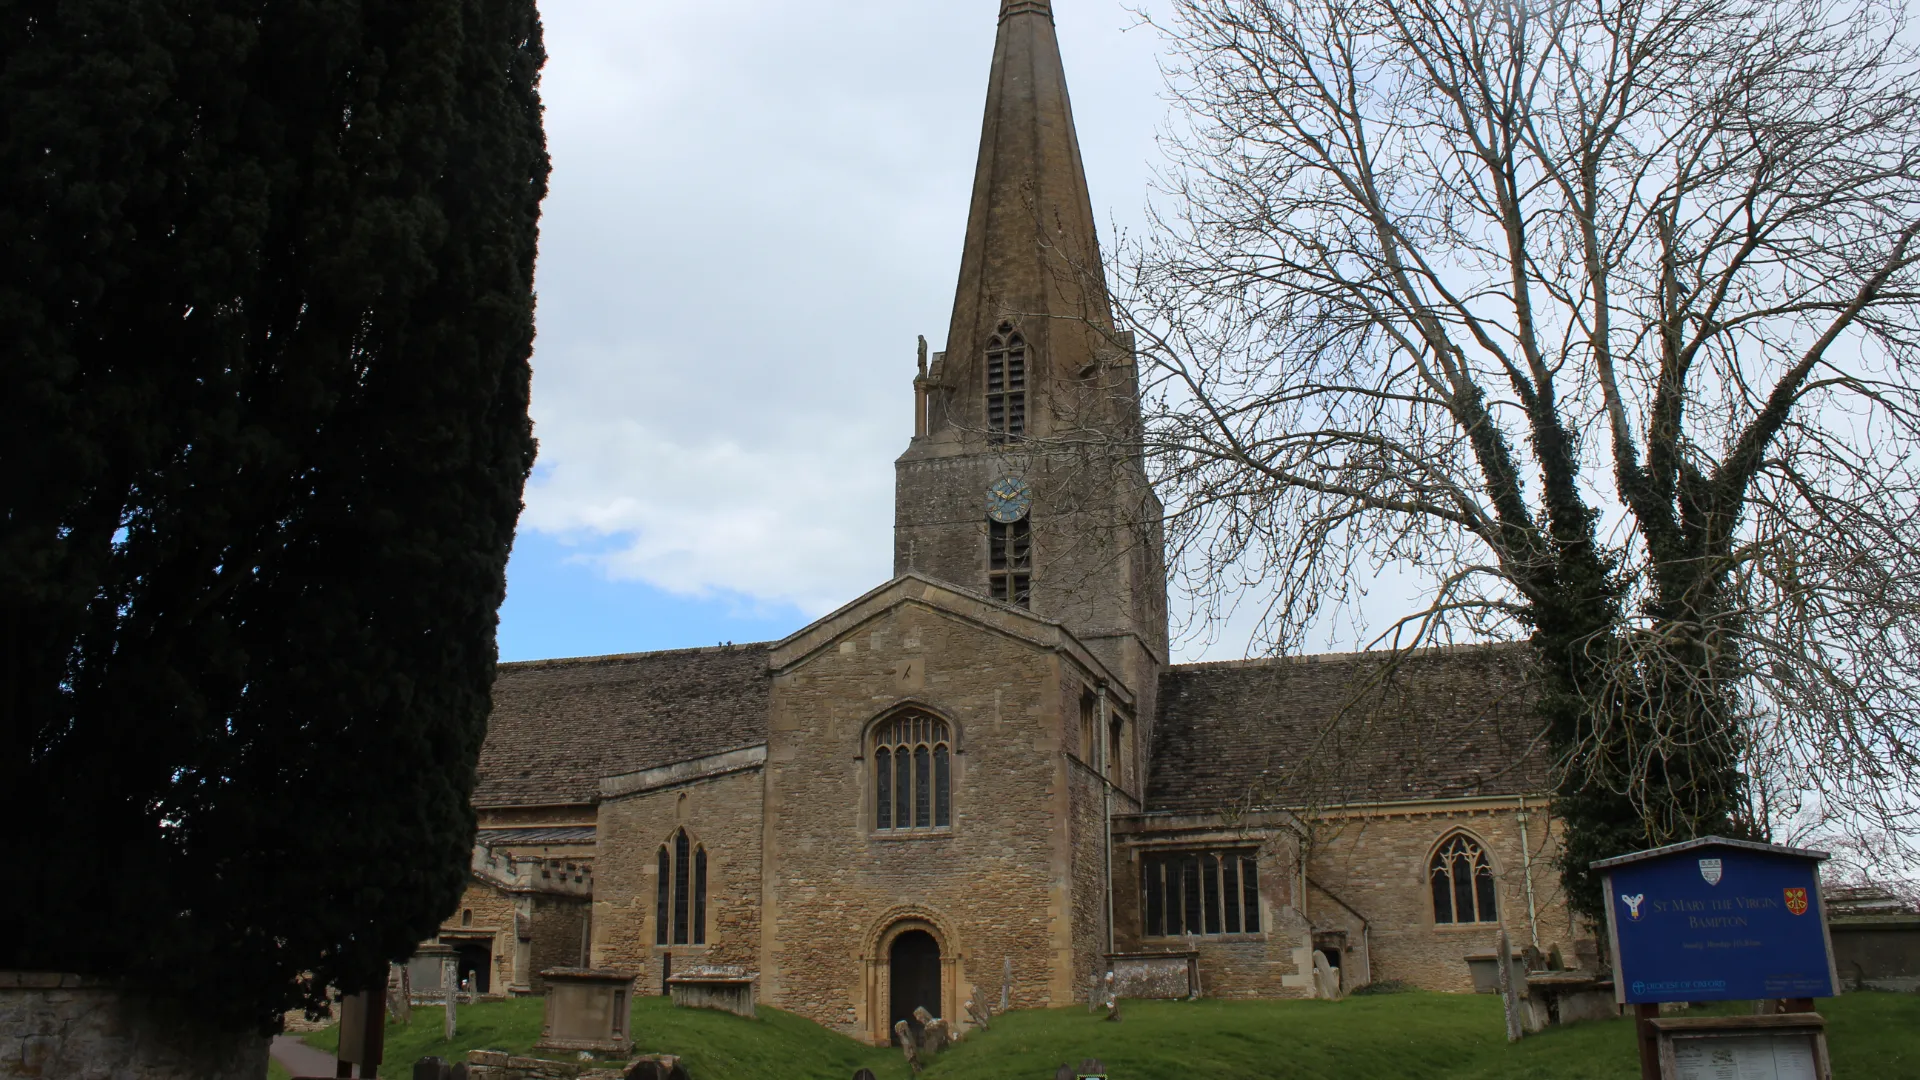 A historic stone church with a tall, pointed spire, surrounded by leafless trees under a cloudy sky. a blue information sign is visible near the entrance.